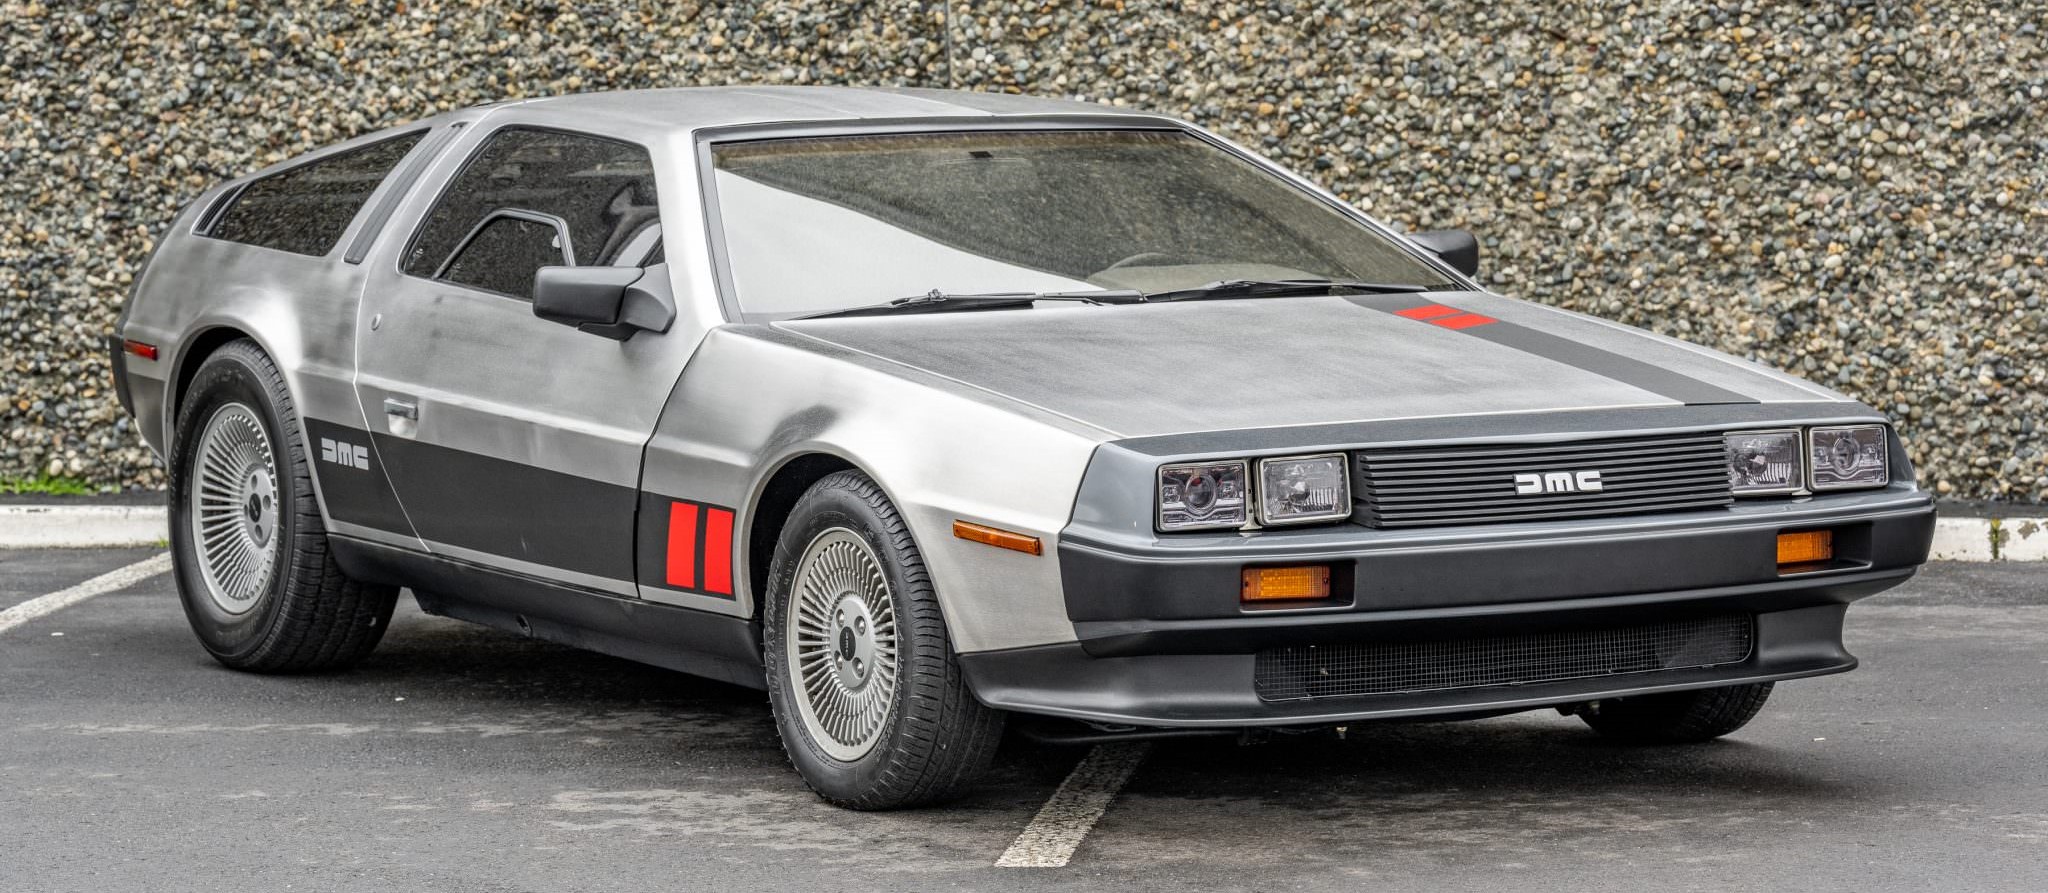 5 European Cars that failed to attract interest in the USA